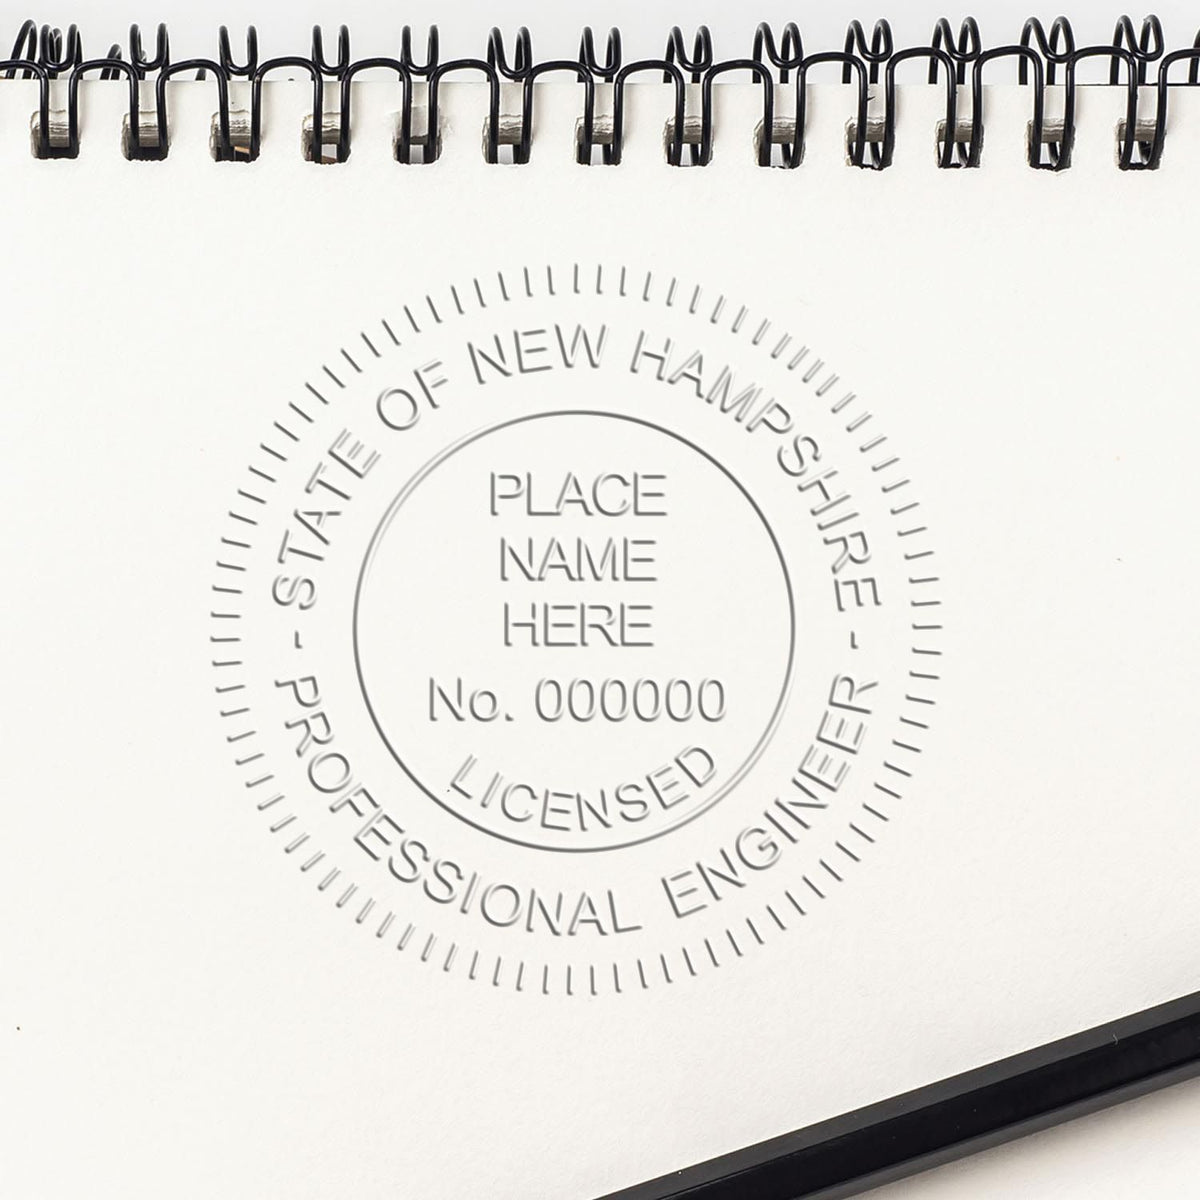 An alternative view of the Heavy Duty Cast Iron New Hampshire Engineer Seal Embosser stamped on a sheet of paper showing the image in use